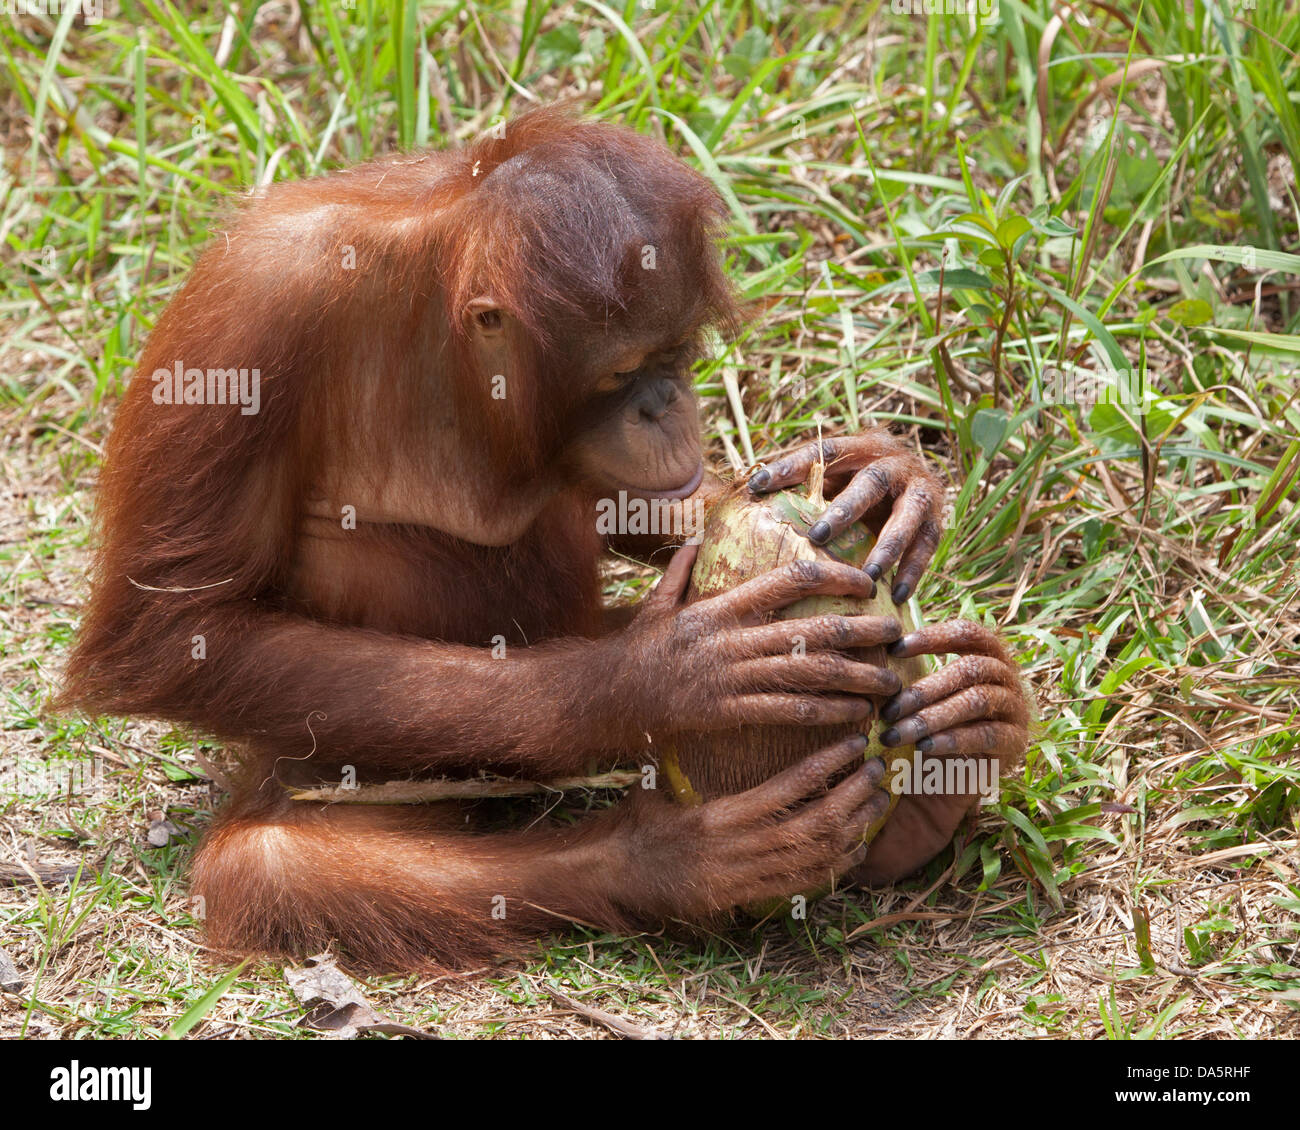 Young orphan orangutan holding a coconut in hands and feet while playing in outdoor exploration session at the Orangutan Care Center. Pongo pygmaeus Stock Photo